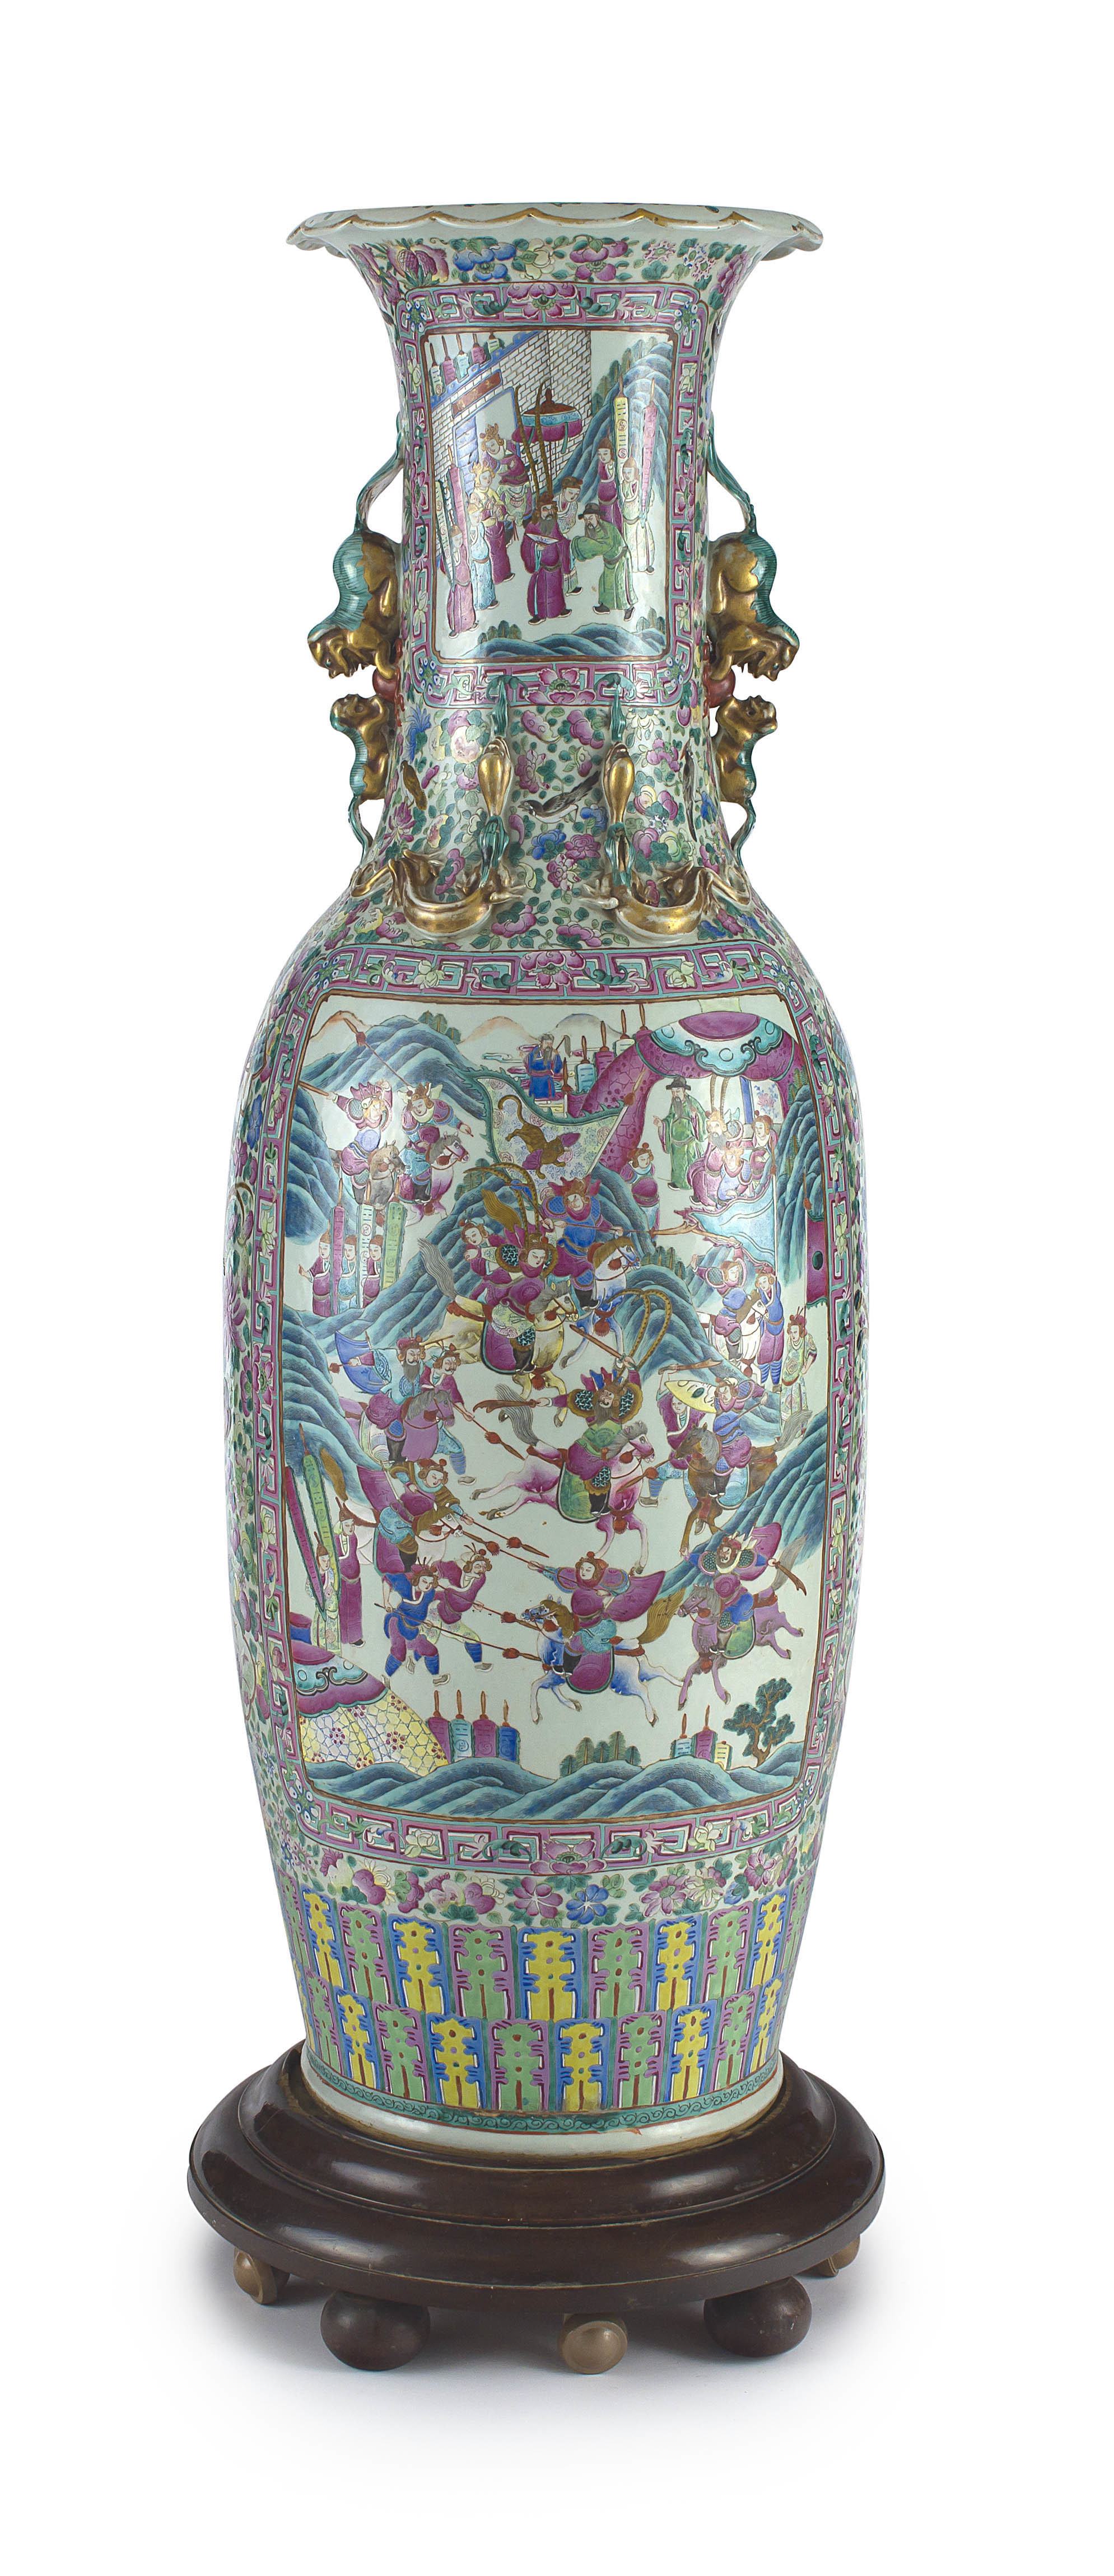 A large Canton famille-rose vase, Qing dynasty, late 19th century